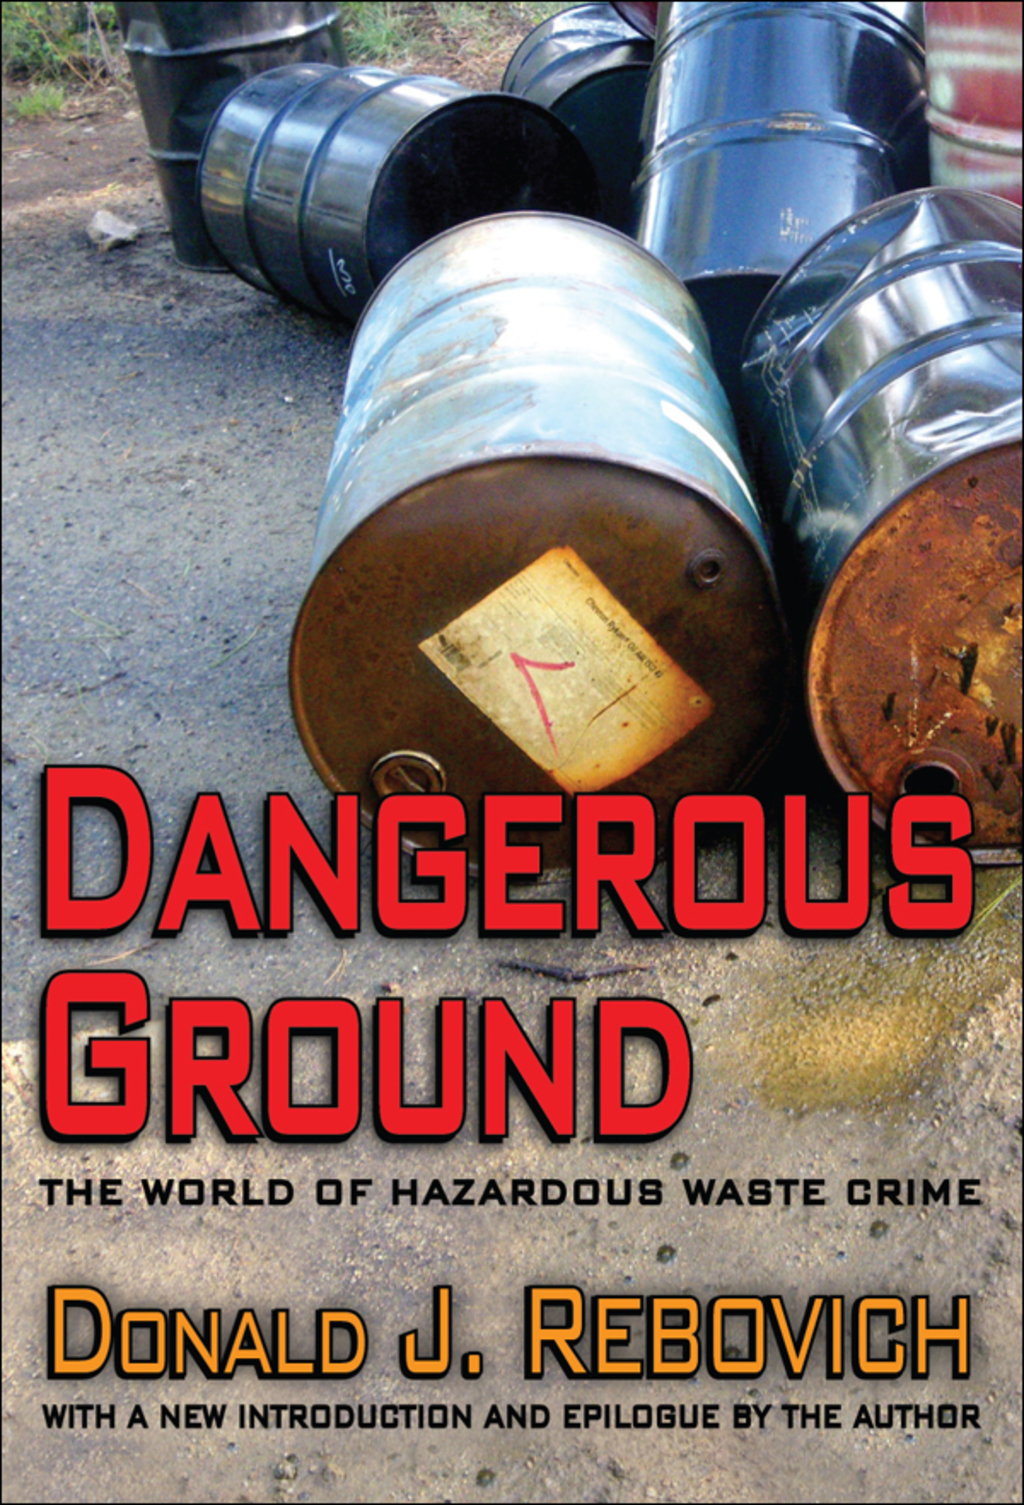 ISBN 9781560000143 product image for Dangerous Ground - 1st Edition (eBook Rental) | upcitemdb.com